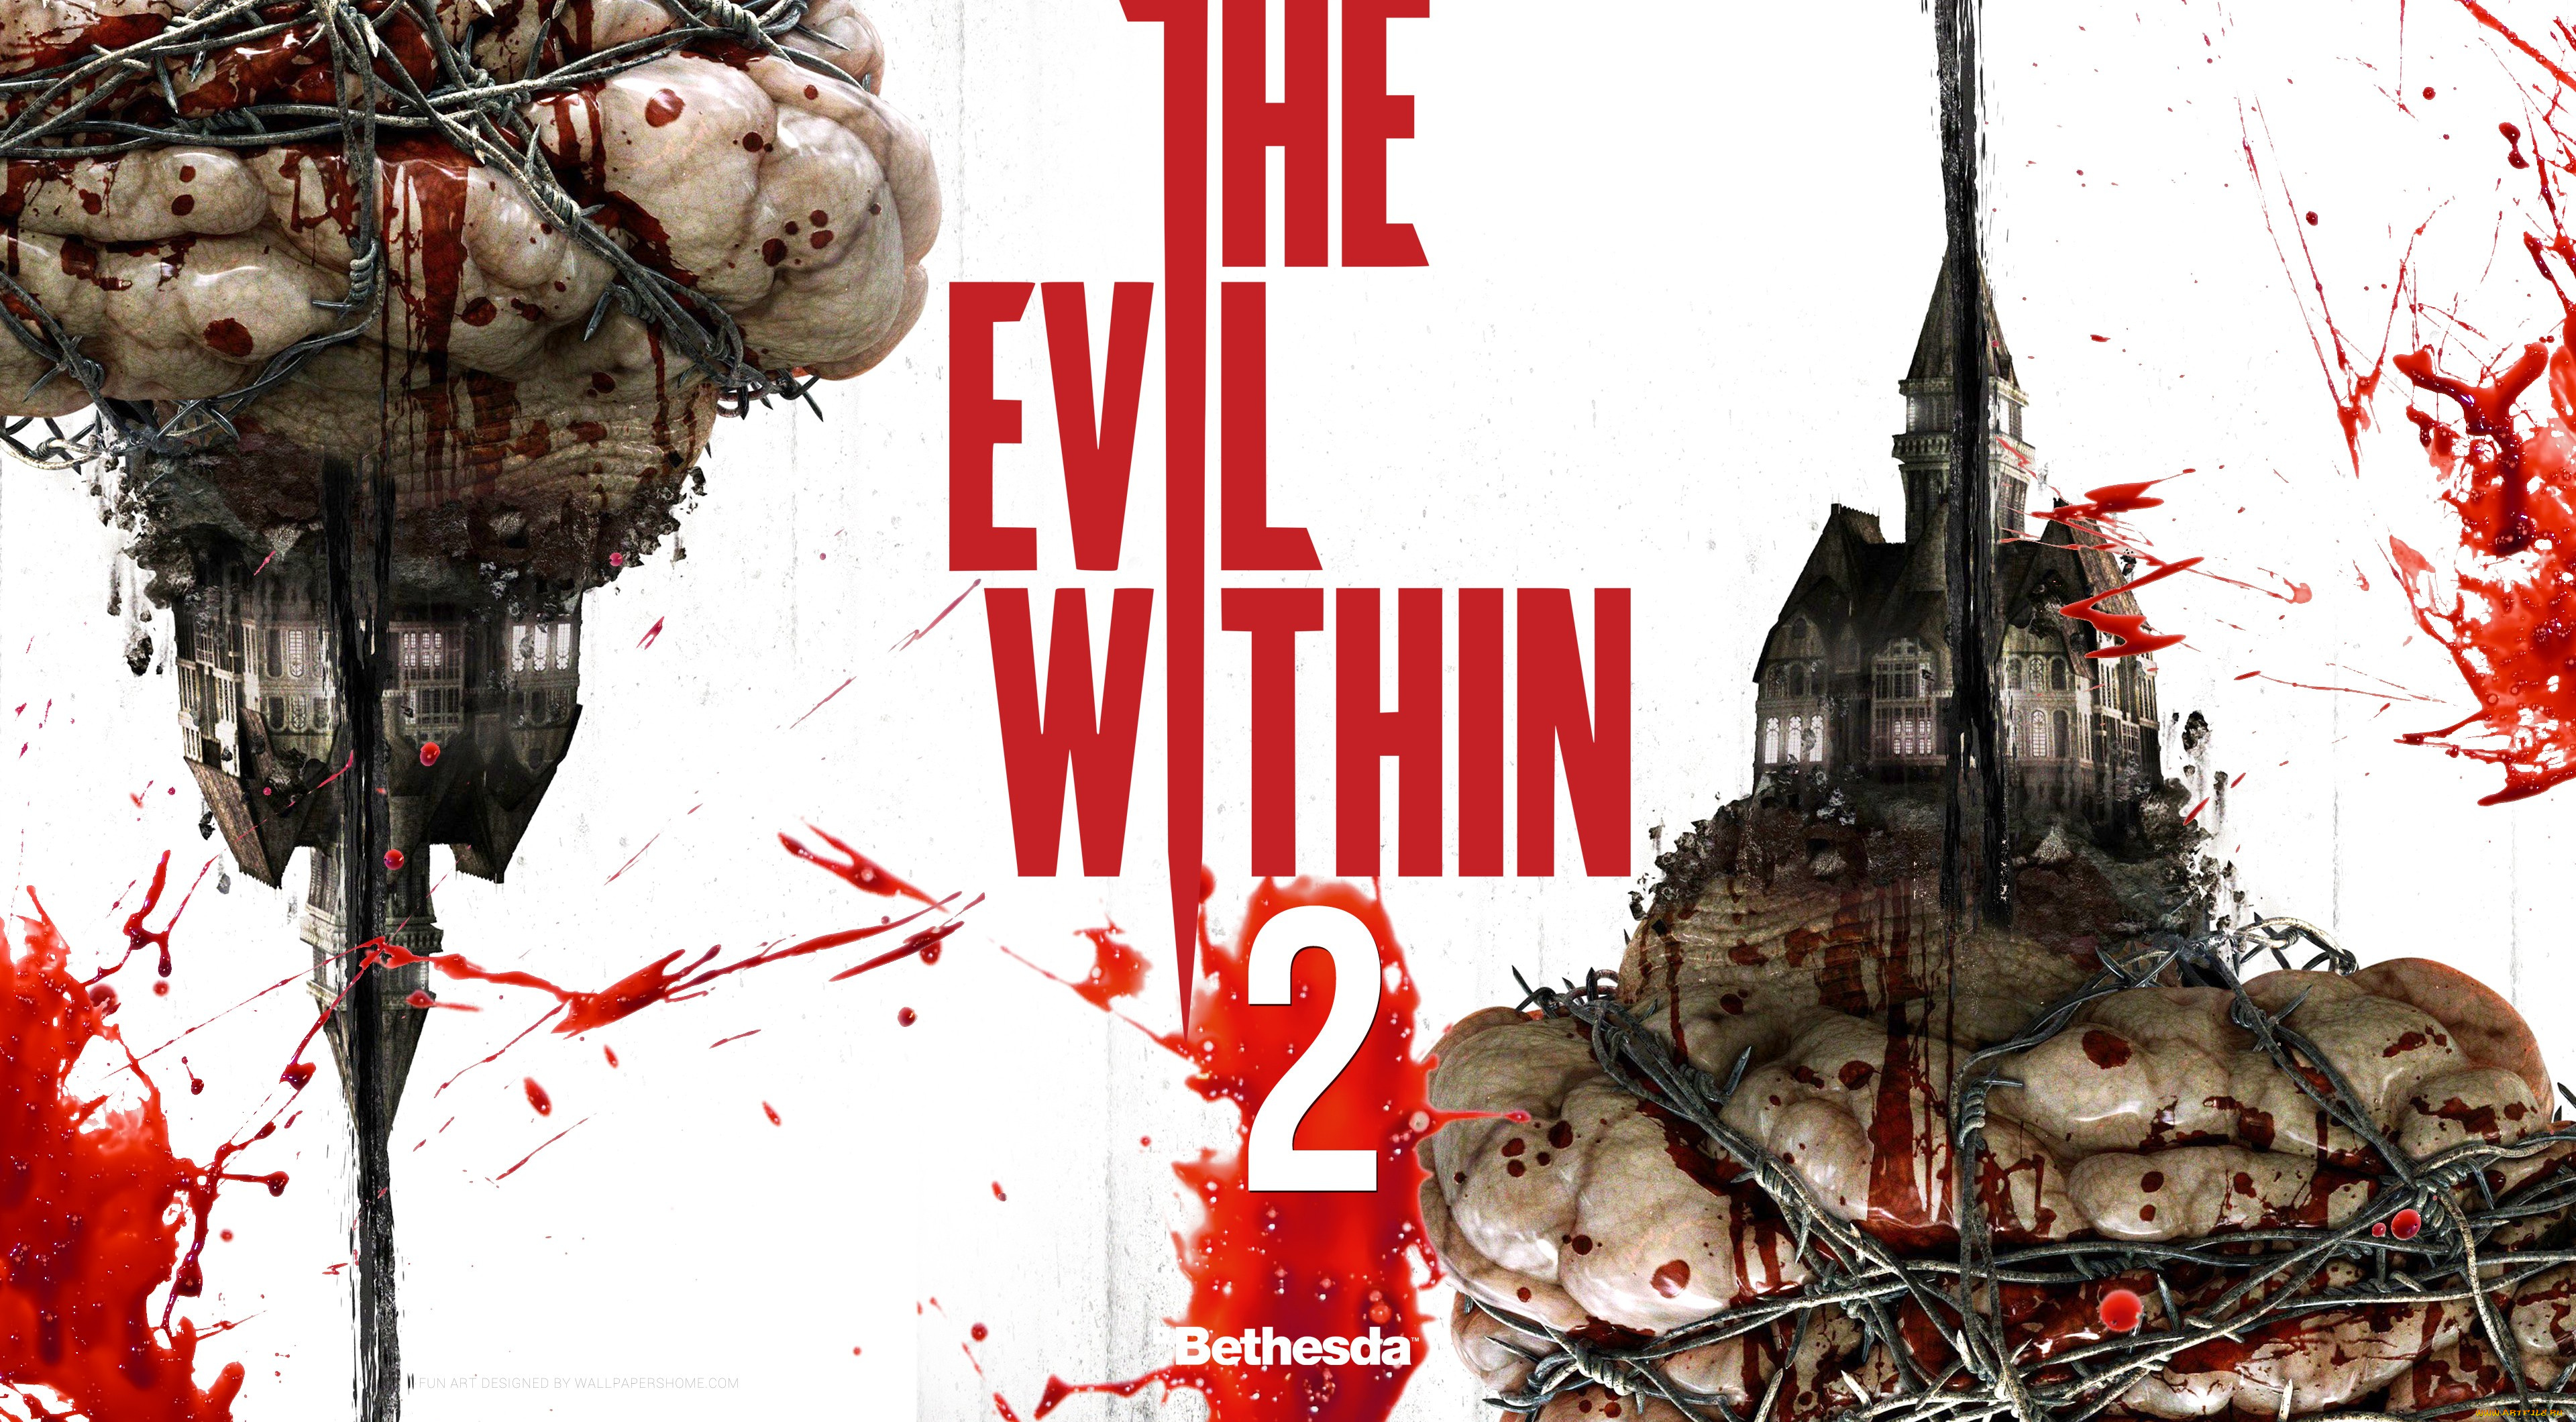 the, evil, within, 2, видео, игры, horror, action, the, evil, within, 2, шутер